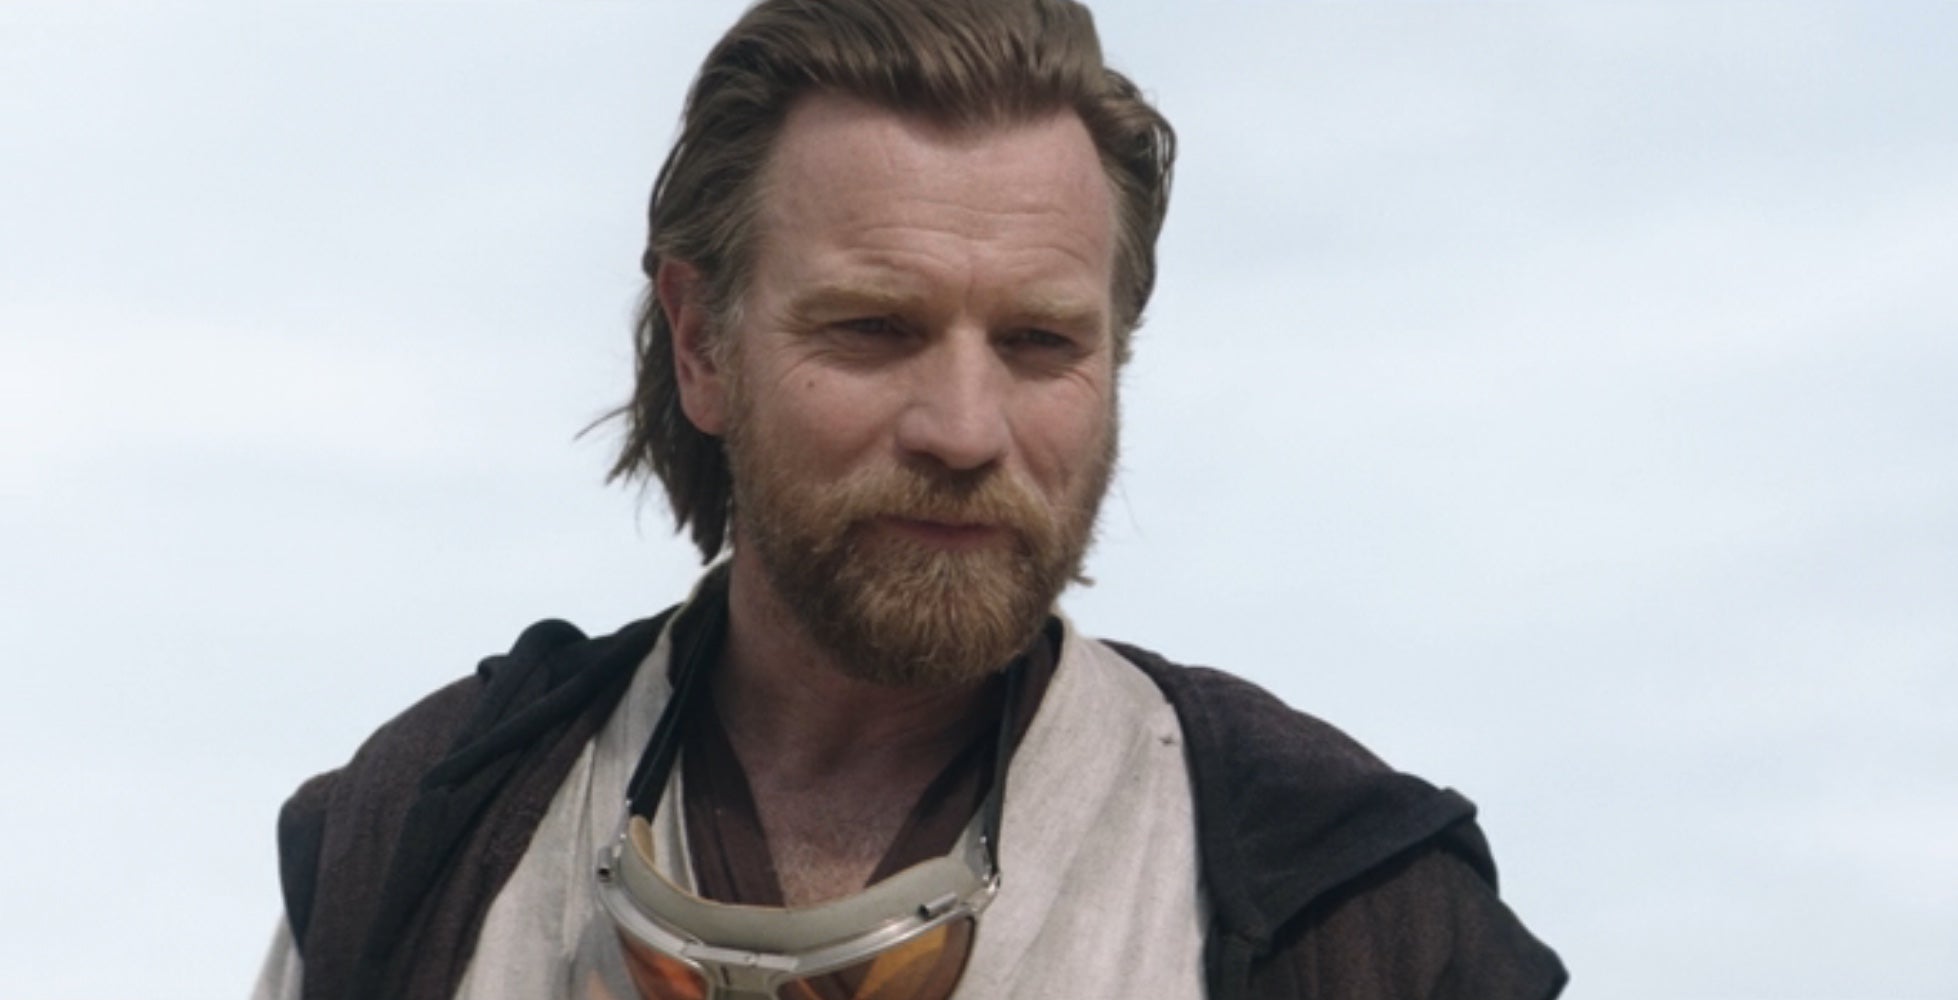 Obi-Wan Kenobi Is Over, and We Have Very Mixed Feelings About It